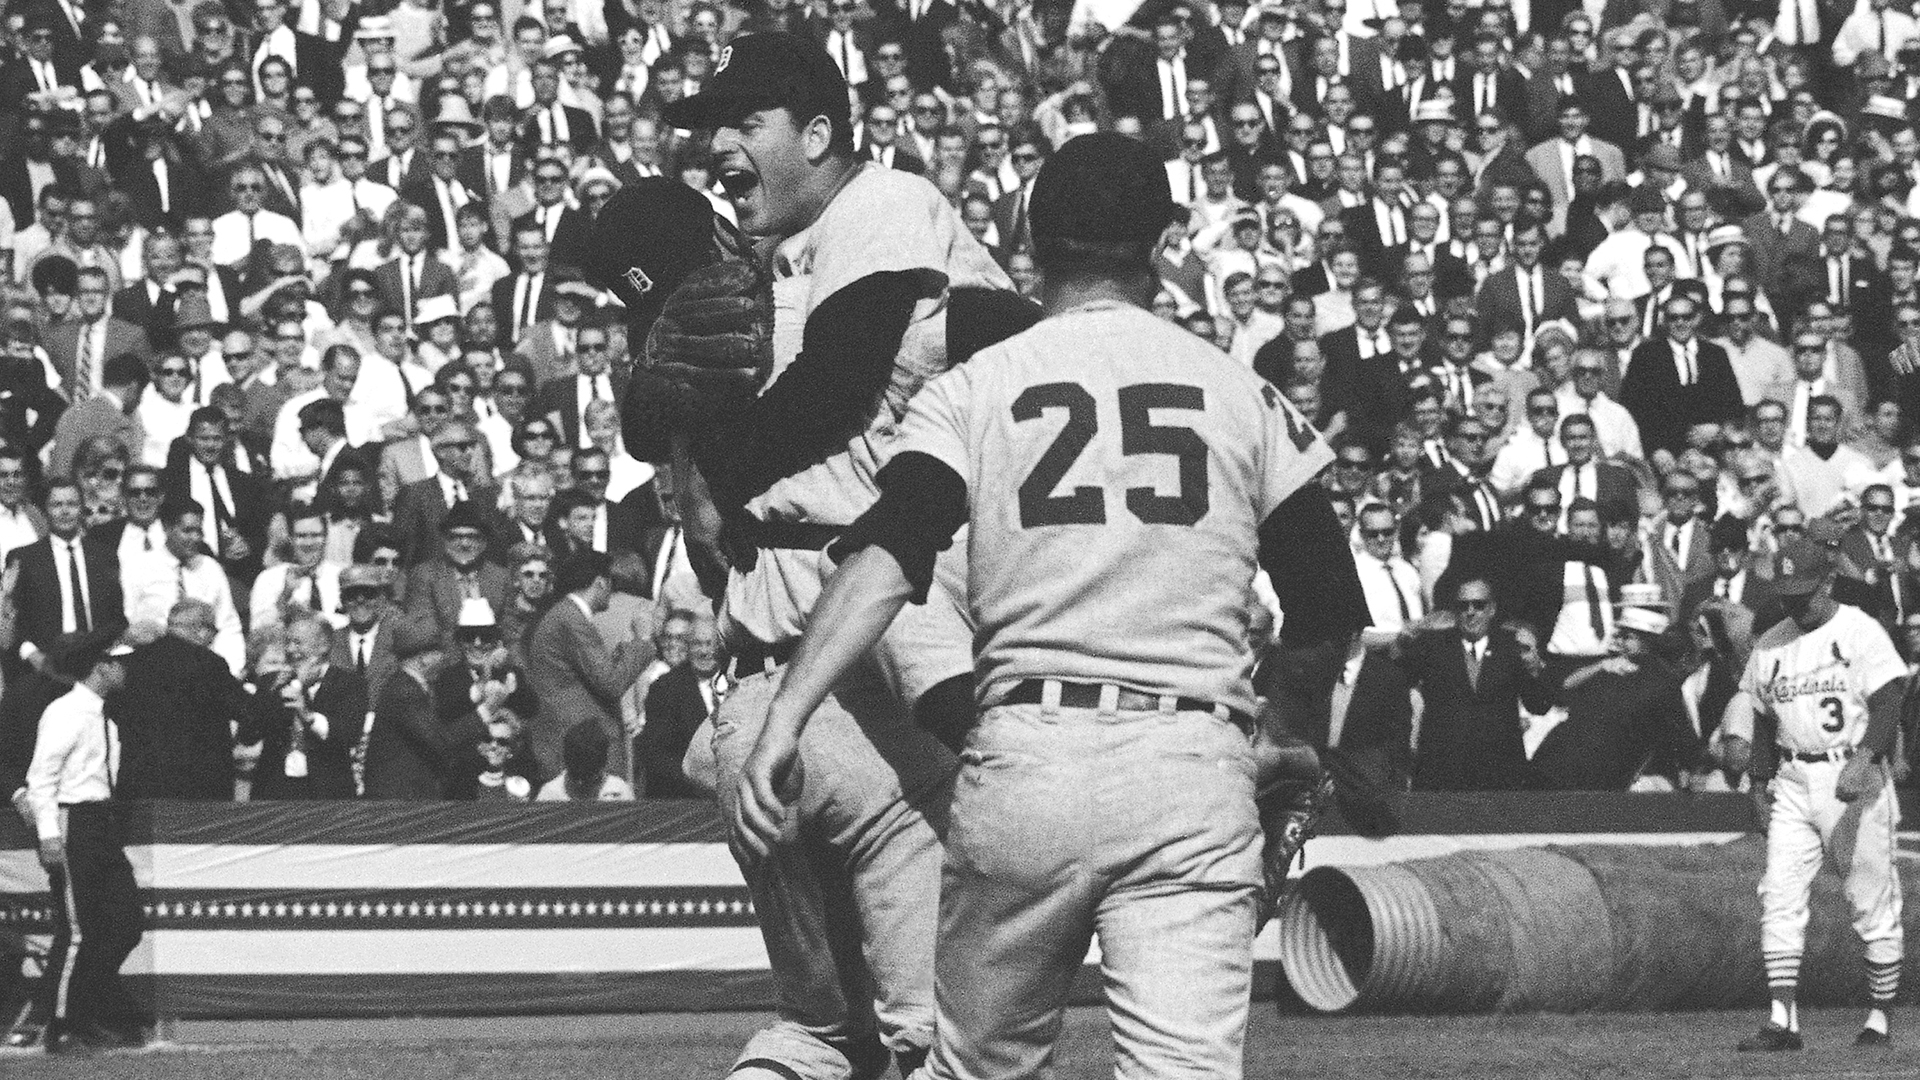 Mickey Lolich and Bill Freehan